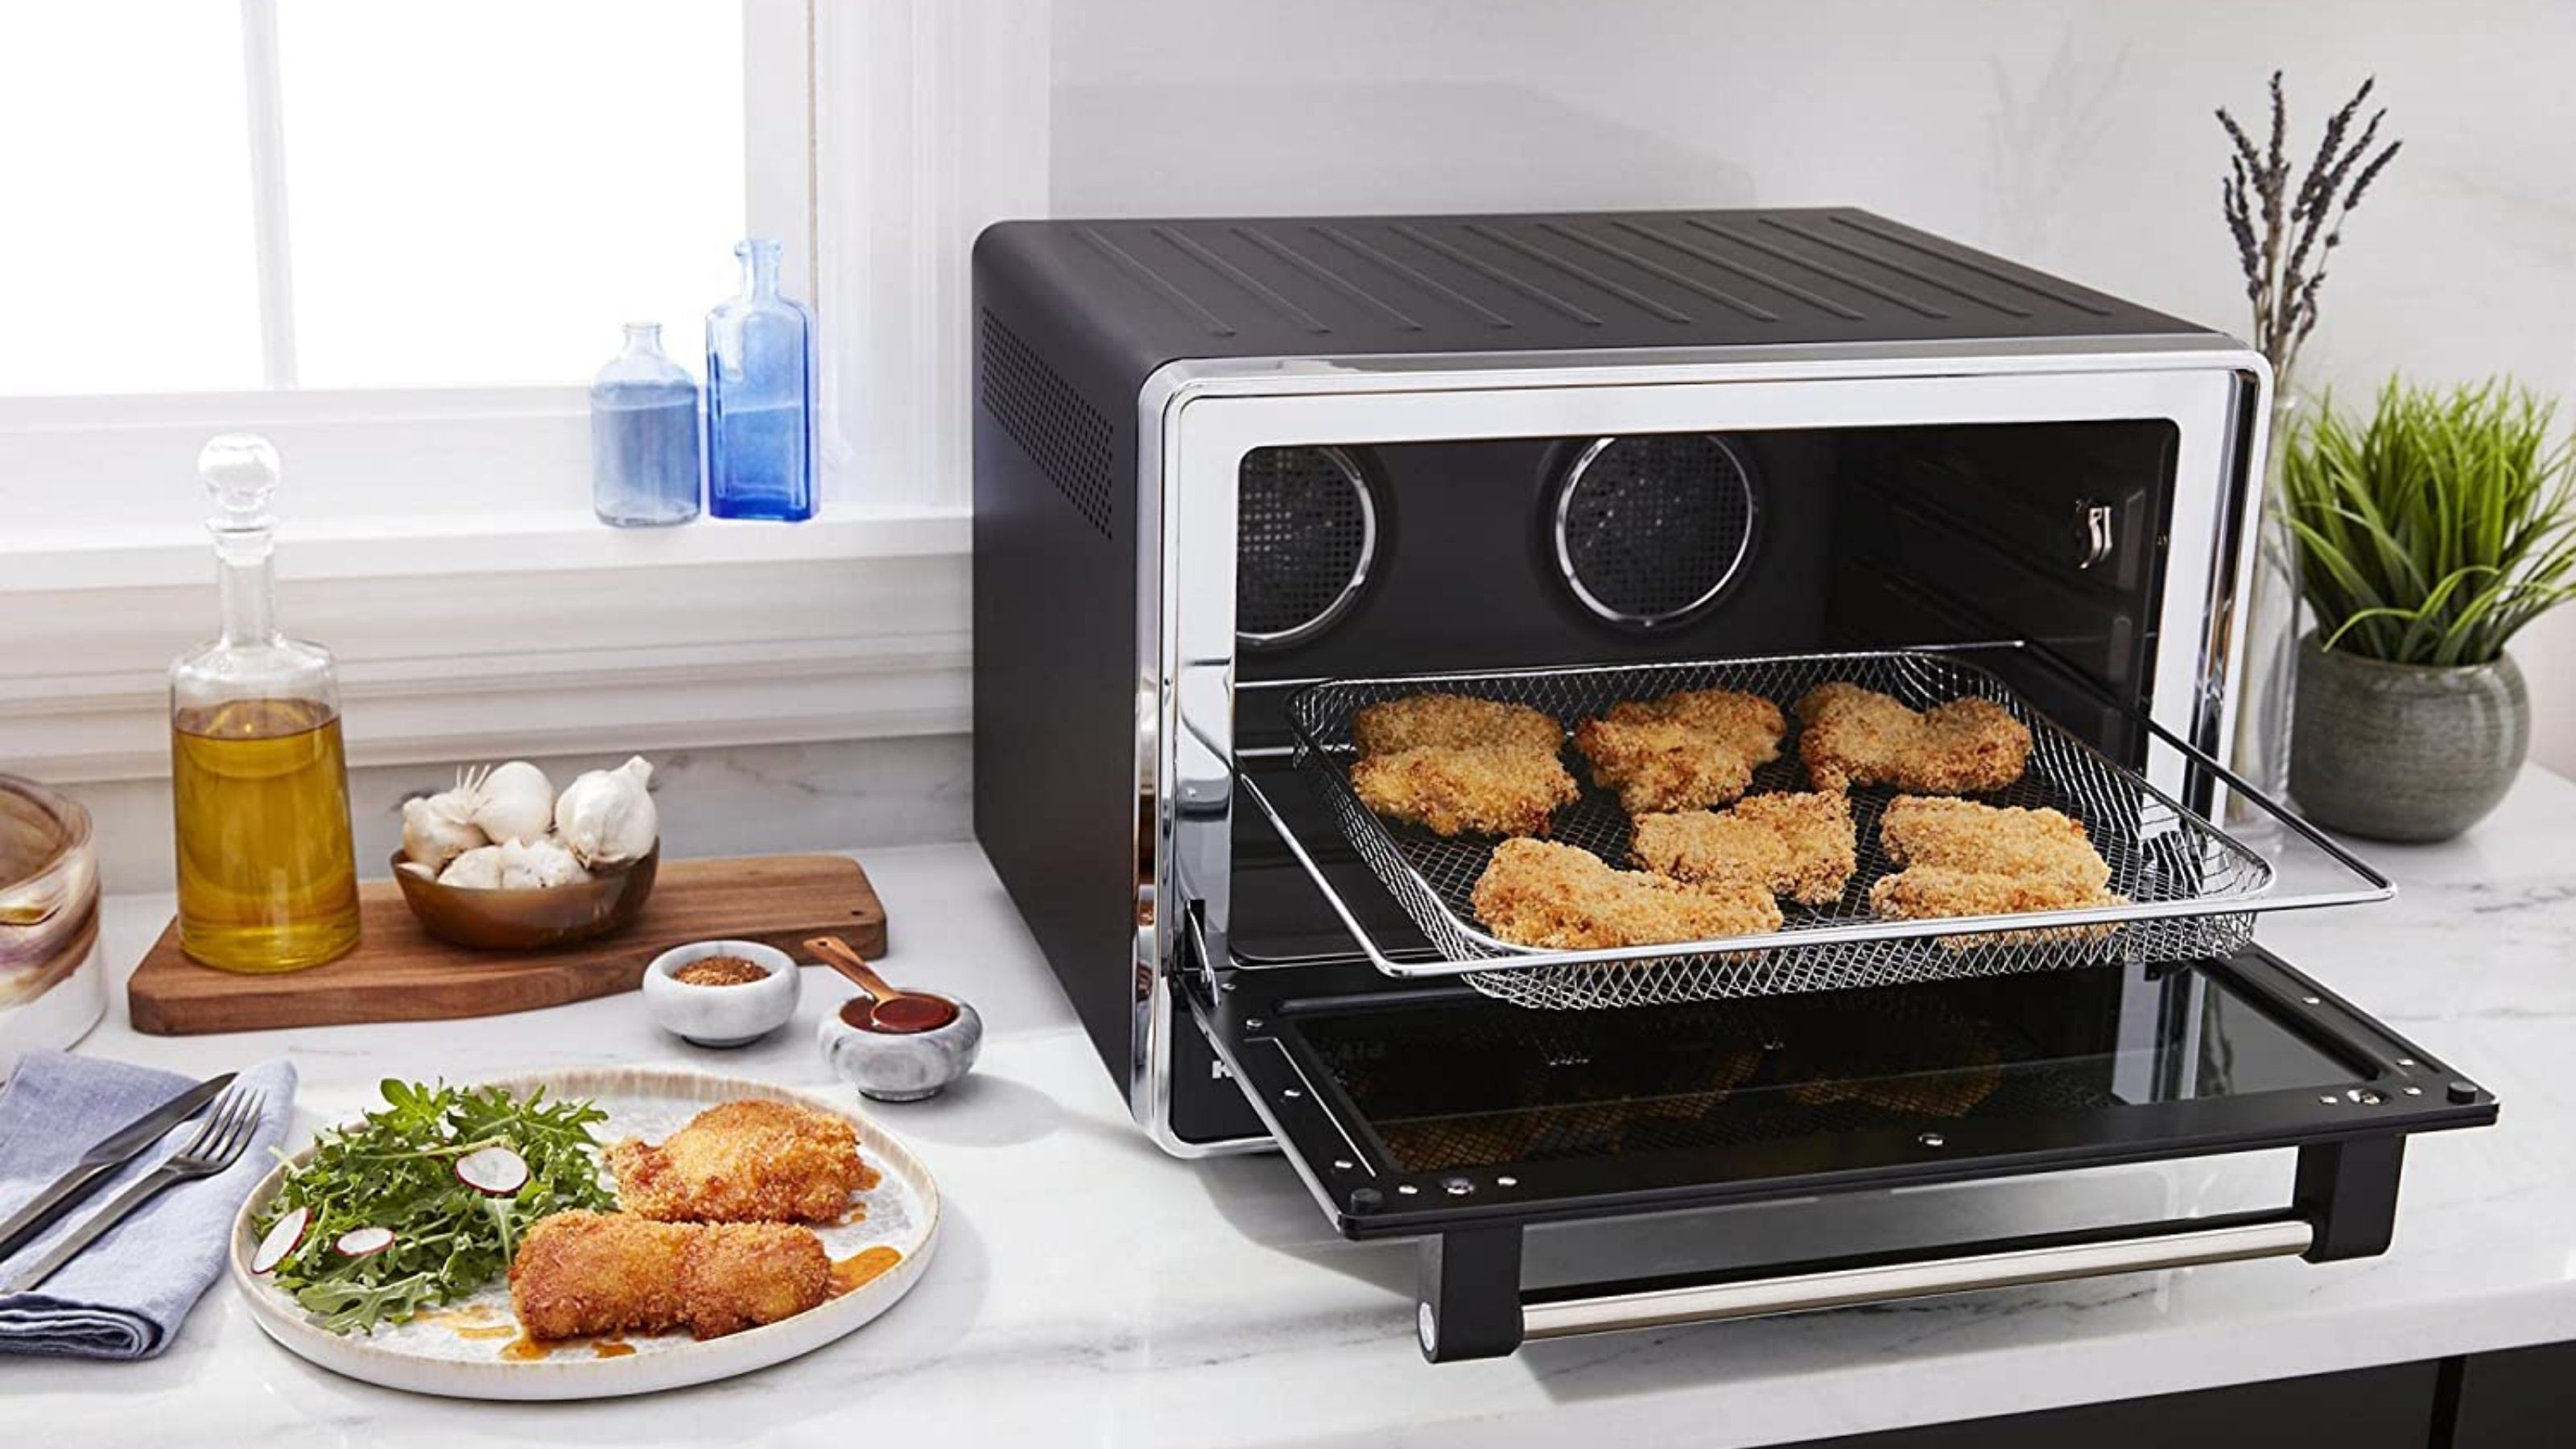 The KitchenAid countertop oven air frying chicken on the surface with food to the left hand side